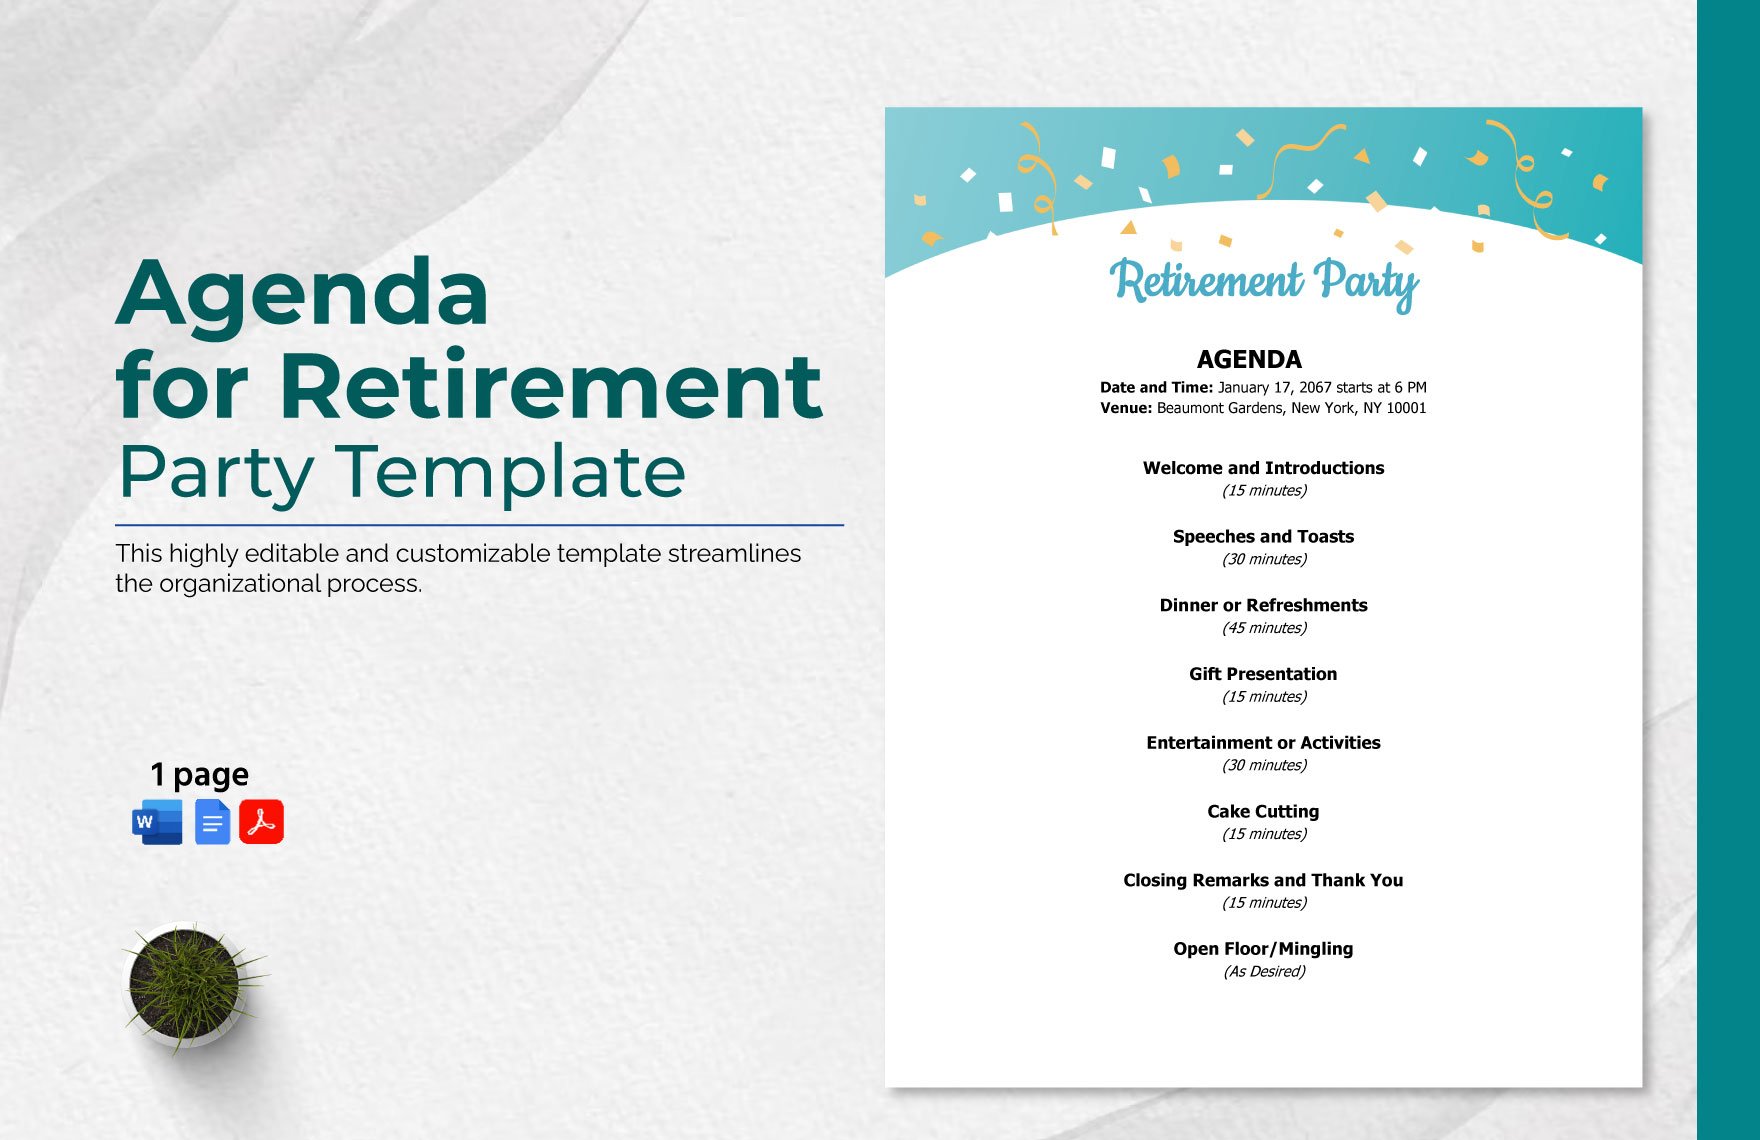 Free Agenda for Retirement Party Template in Word, Google Docs, PDF